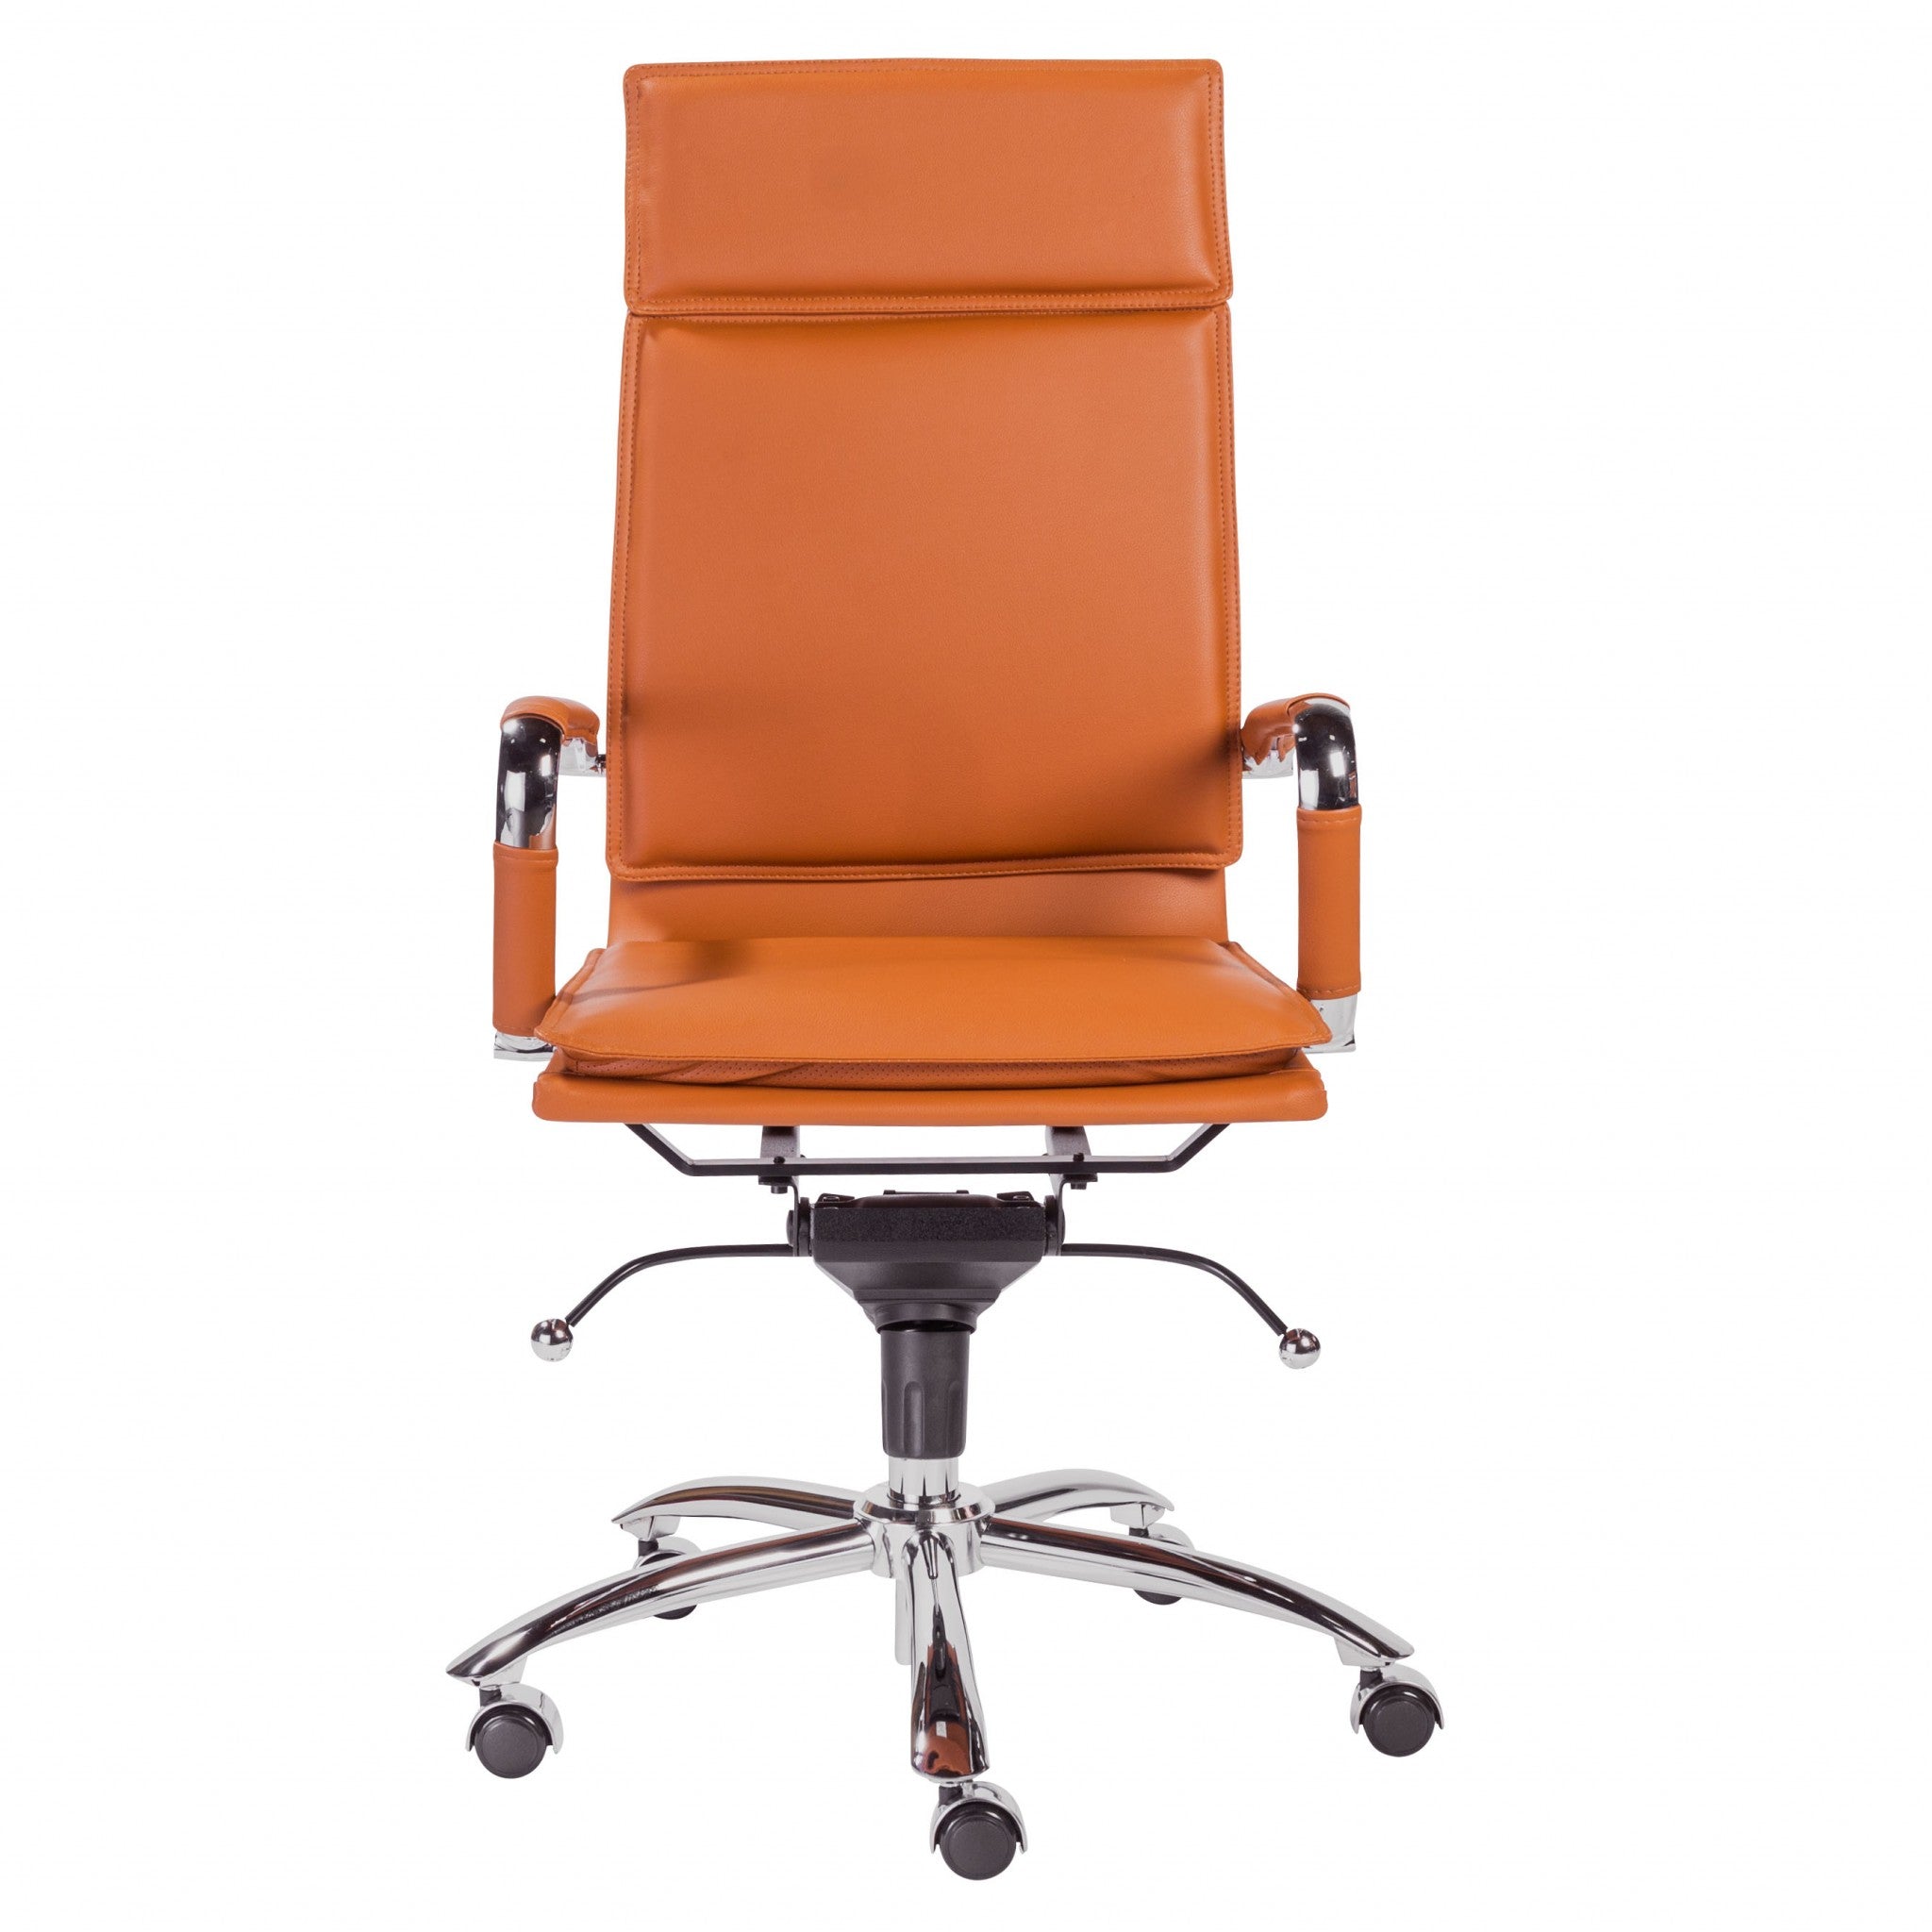 Brown-Faux-Leather-Seat-Swivel-Adjustable-Task-Chair-Leather-Back-Steel-Frame-Office-Chairs